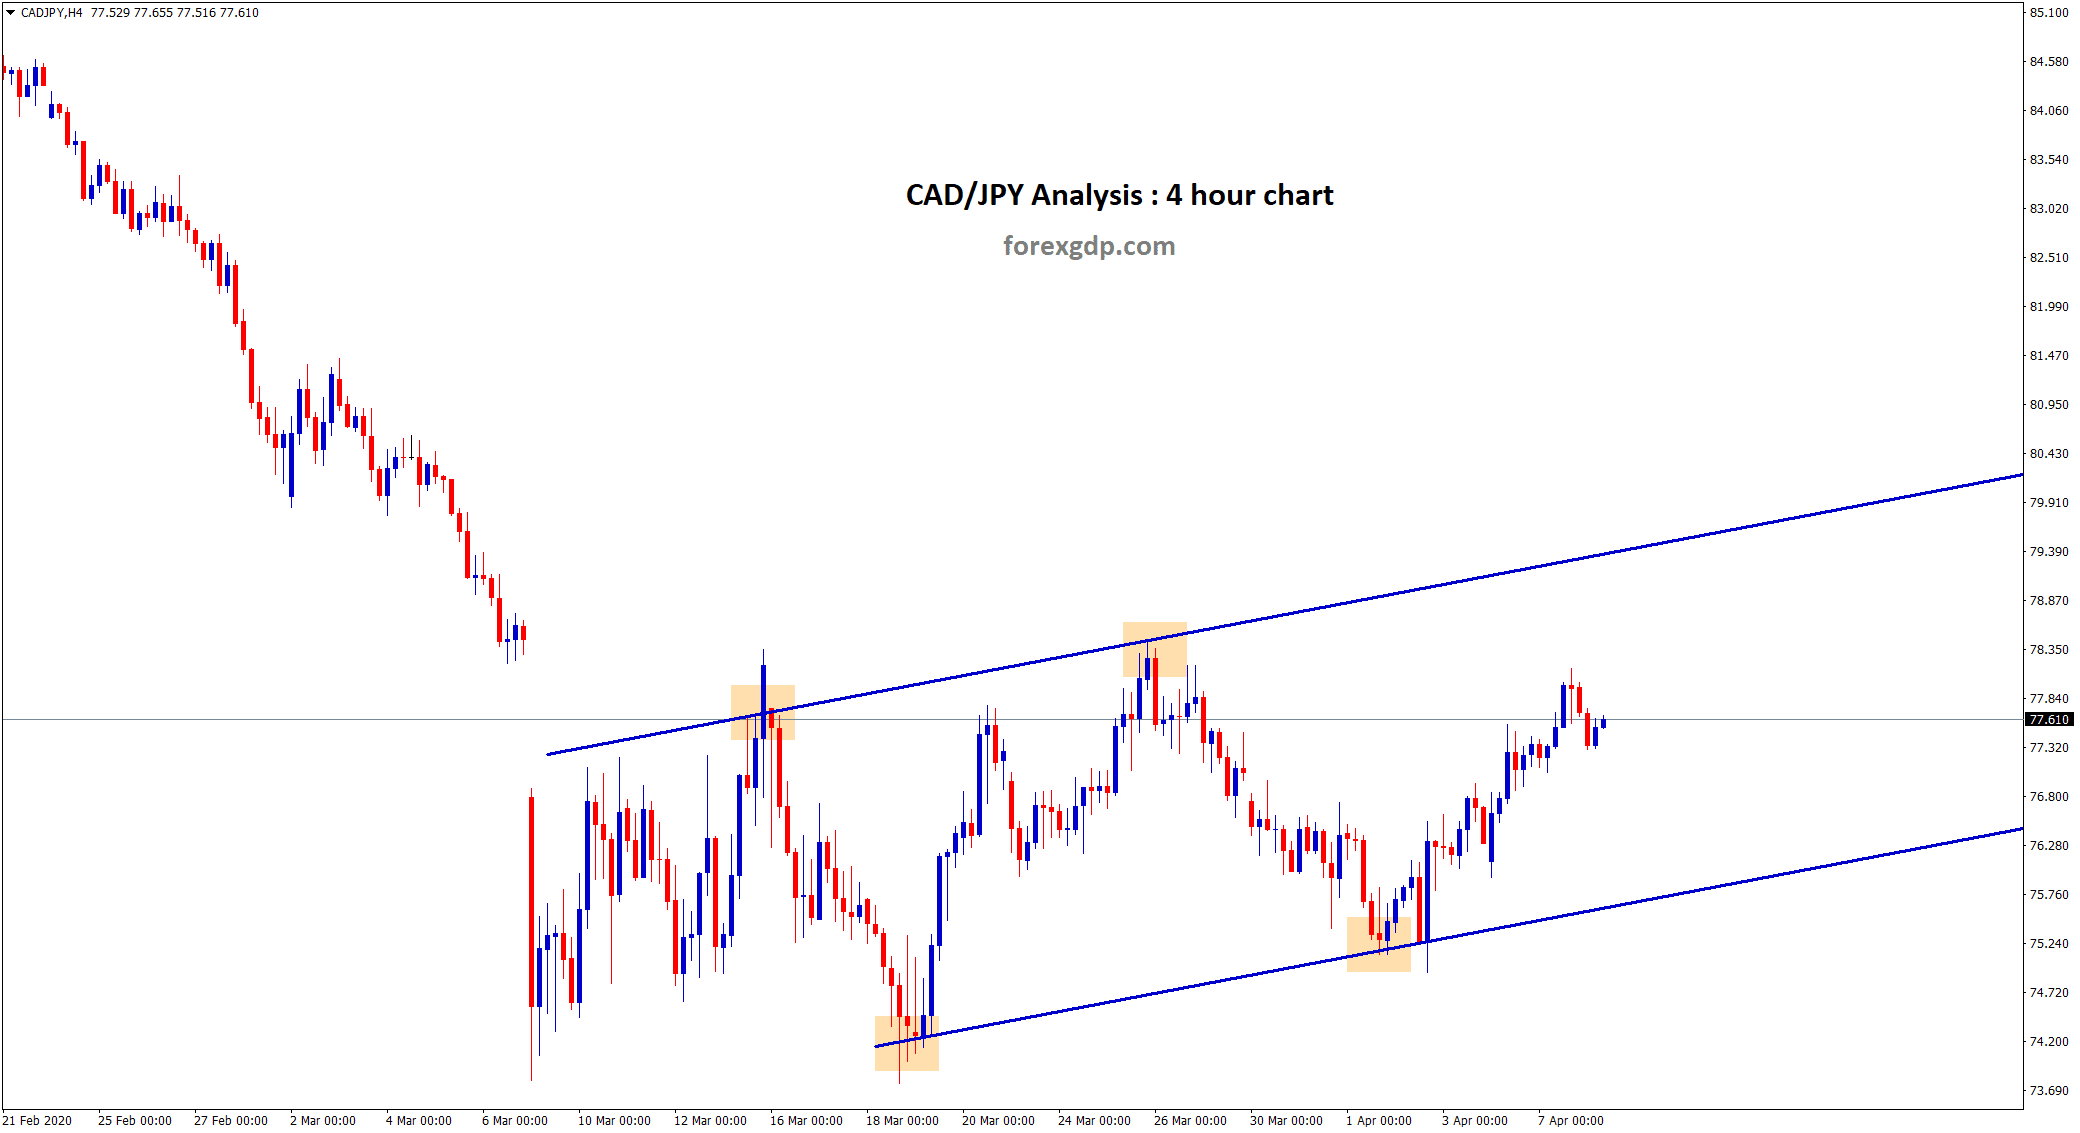 CAD JPY ranging trend still have more space to move up